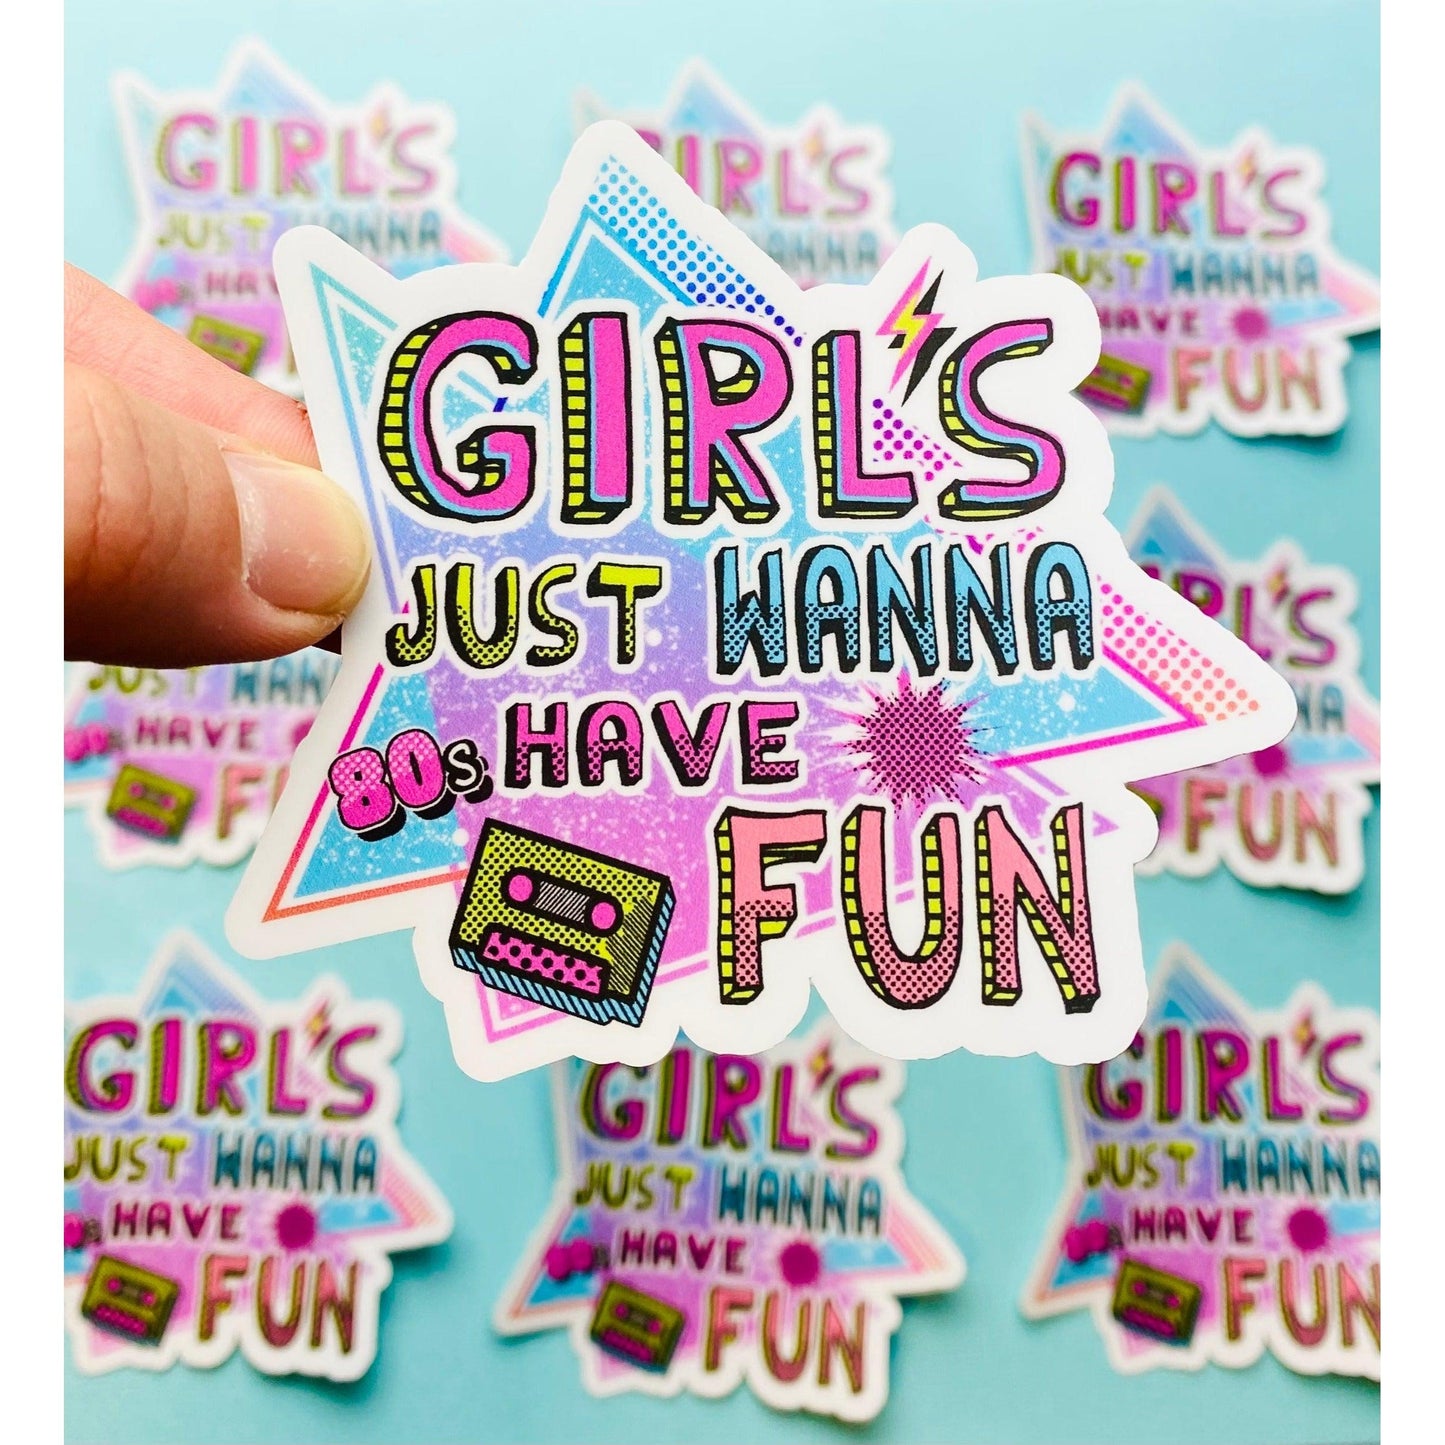 Girls Eighties Vintage Look Sticker Girls Fun 1980s 80s Aesthetic Stickers - Ottos Grotto :: Stickers For Your Stuff